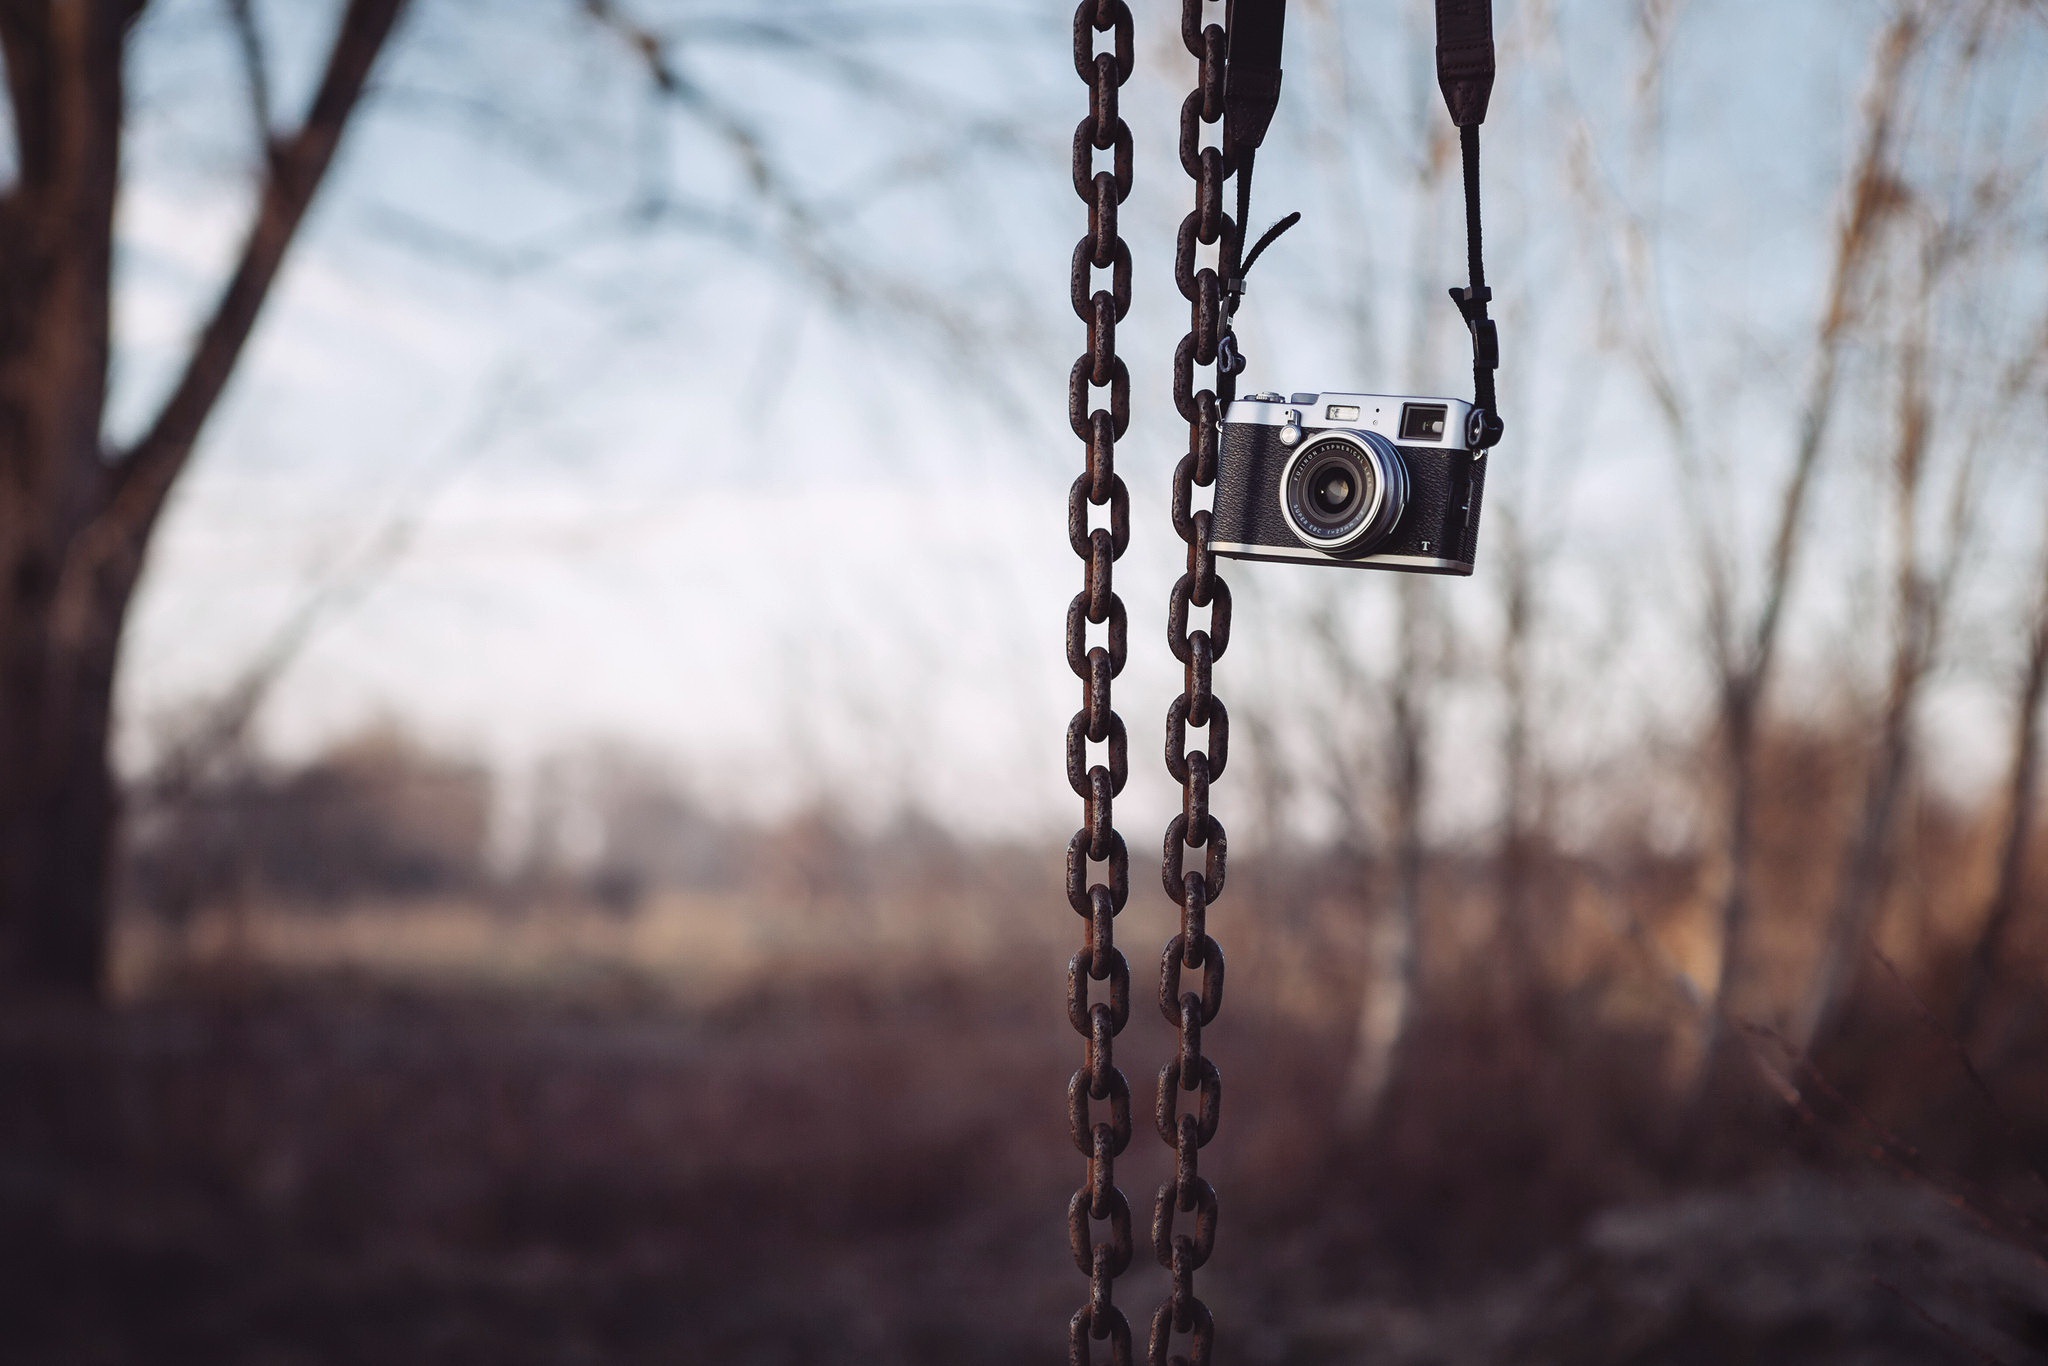 General 2048x1366 chains outdoors camera